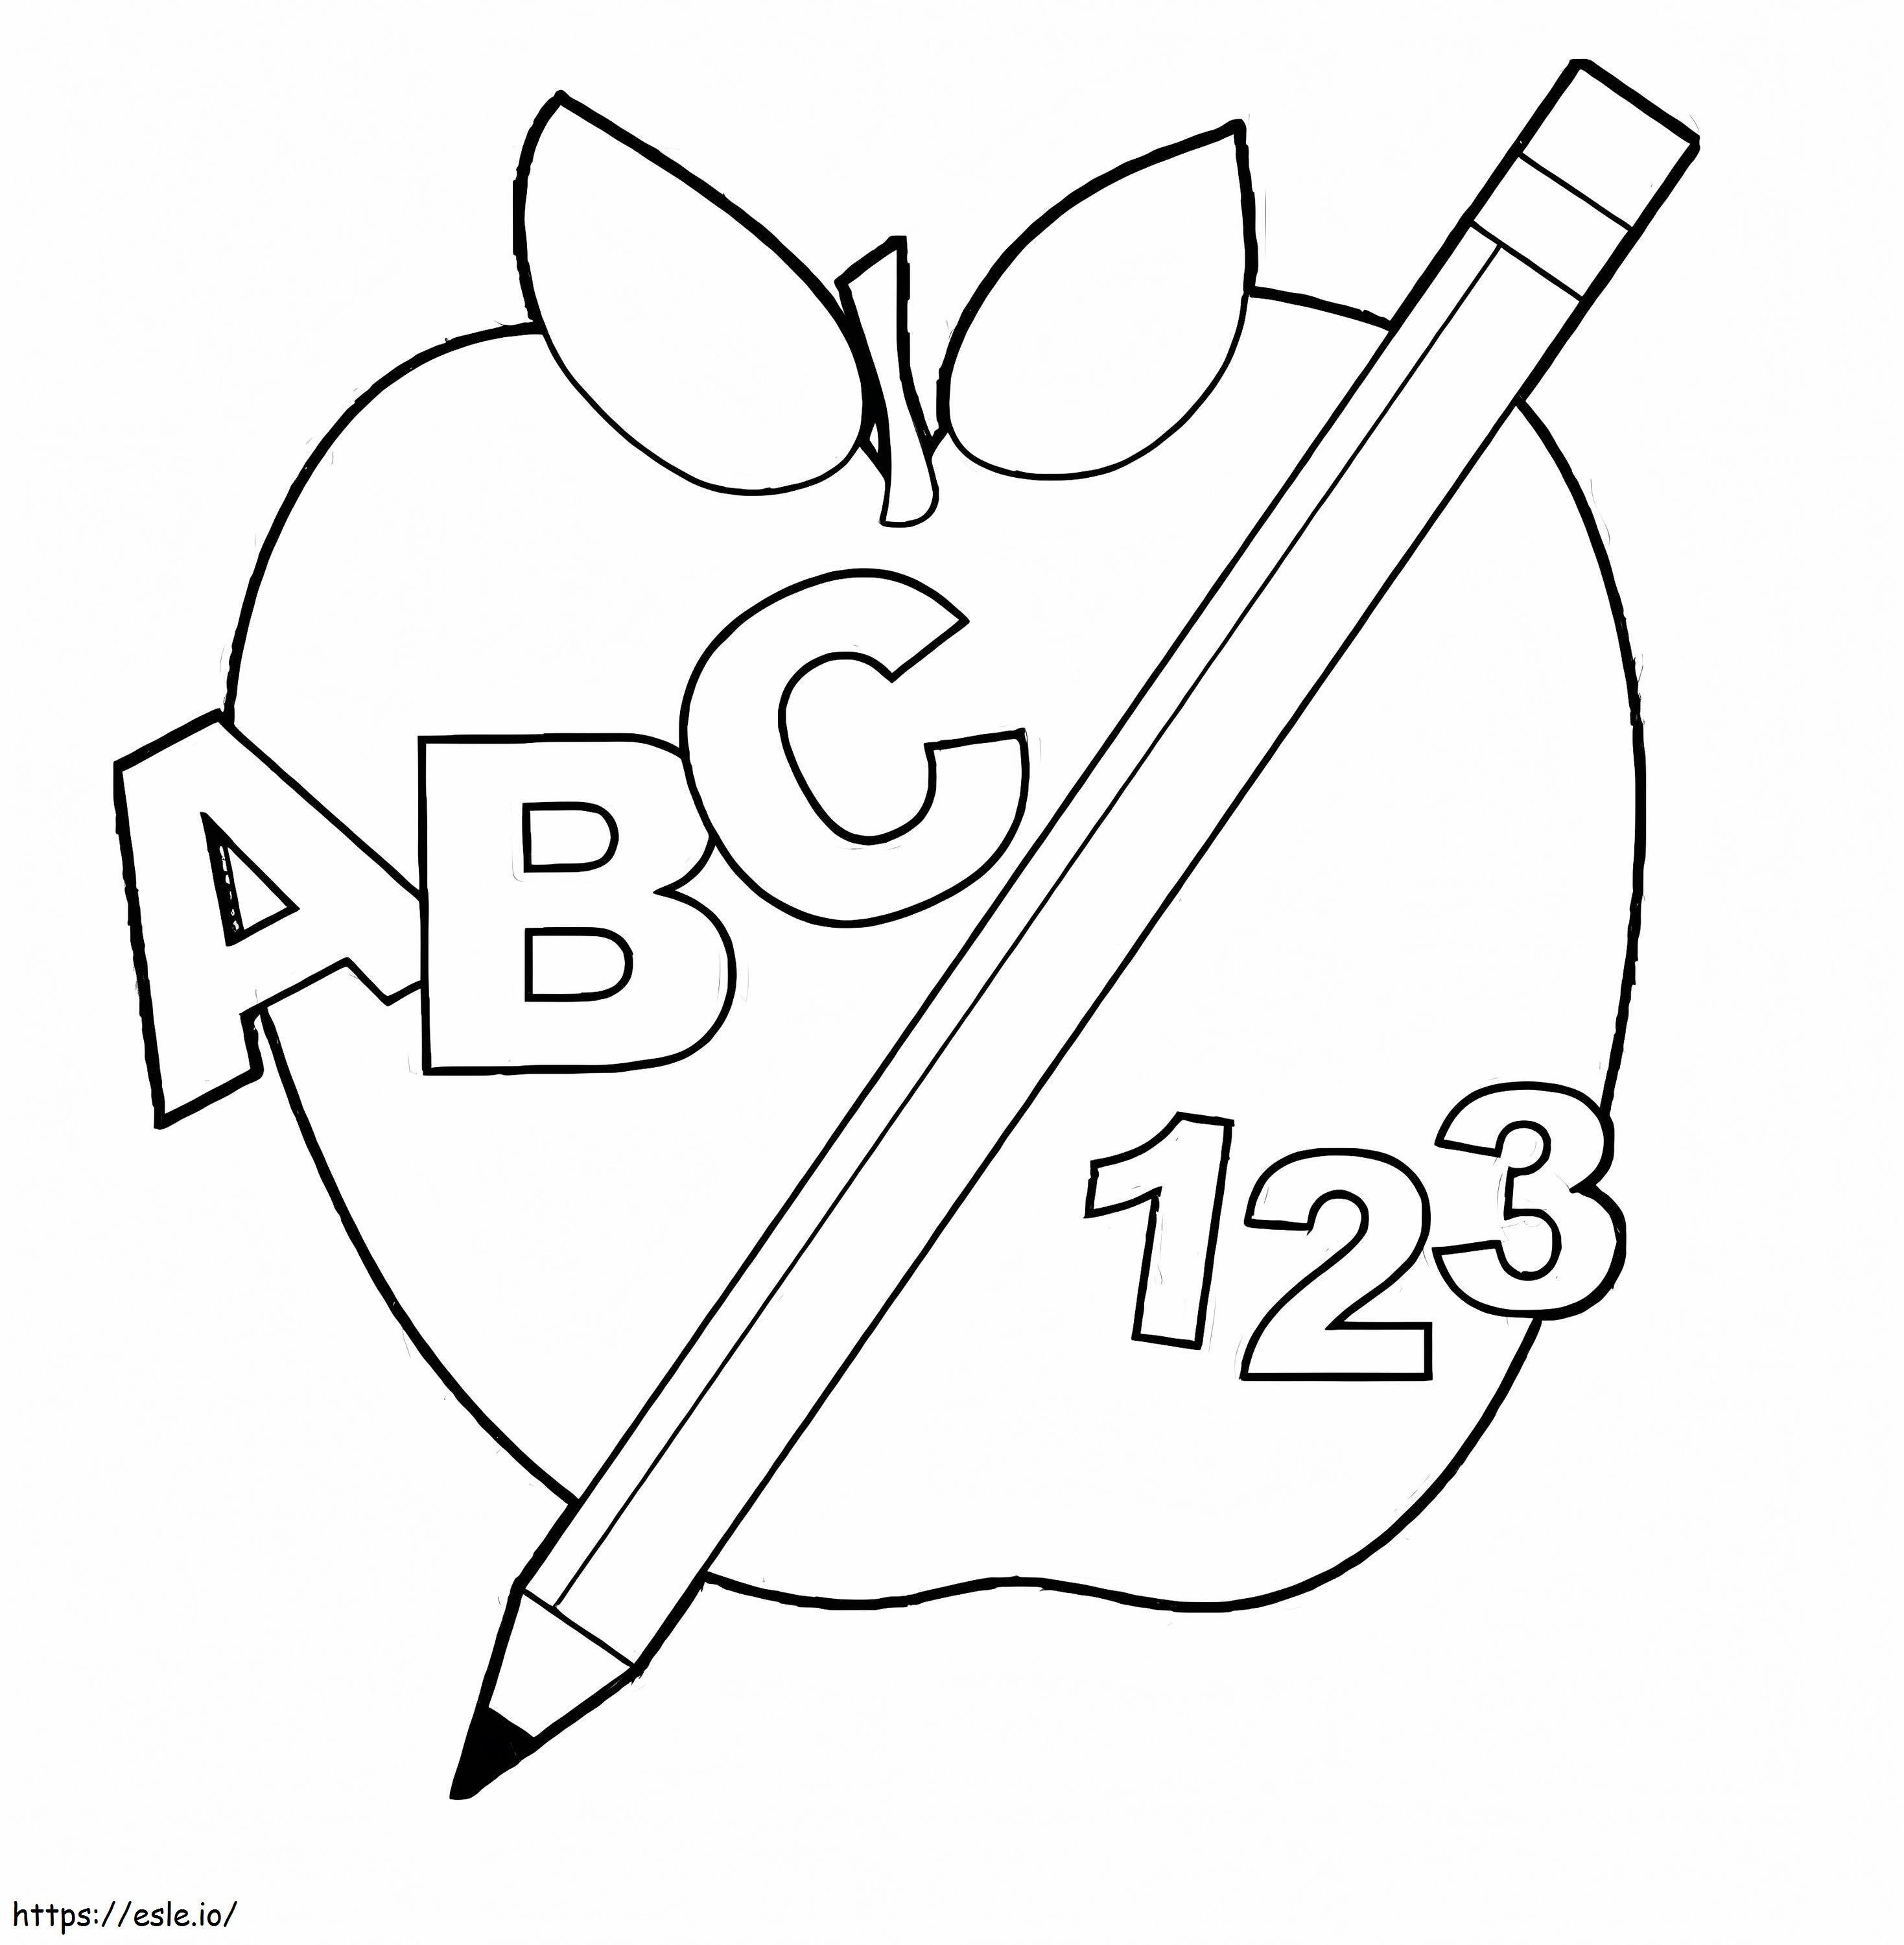 And Abc coloring page